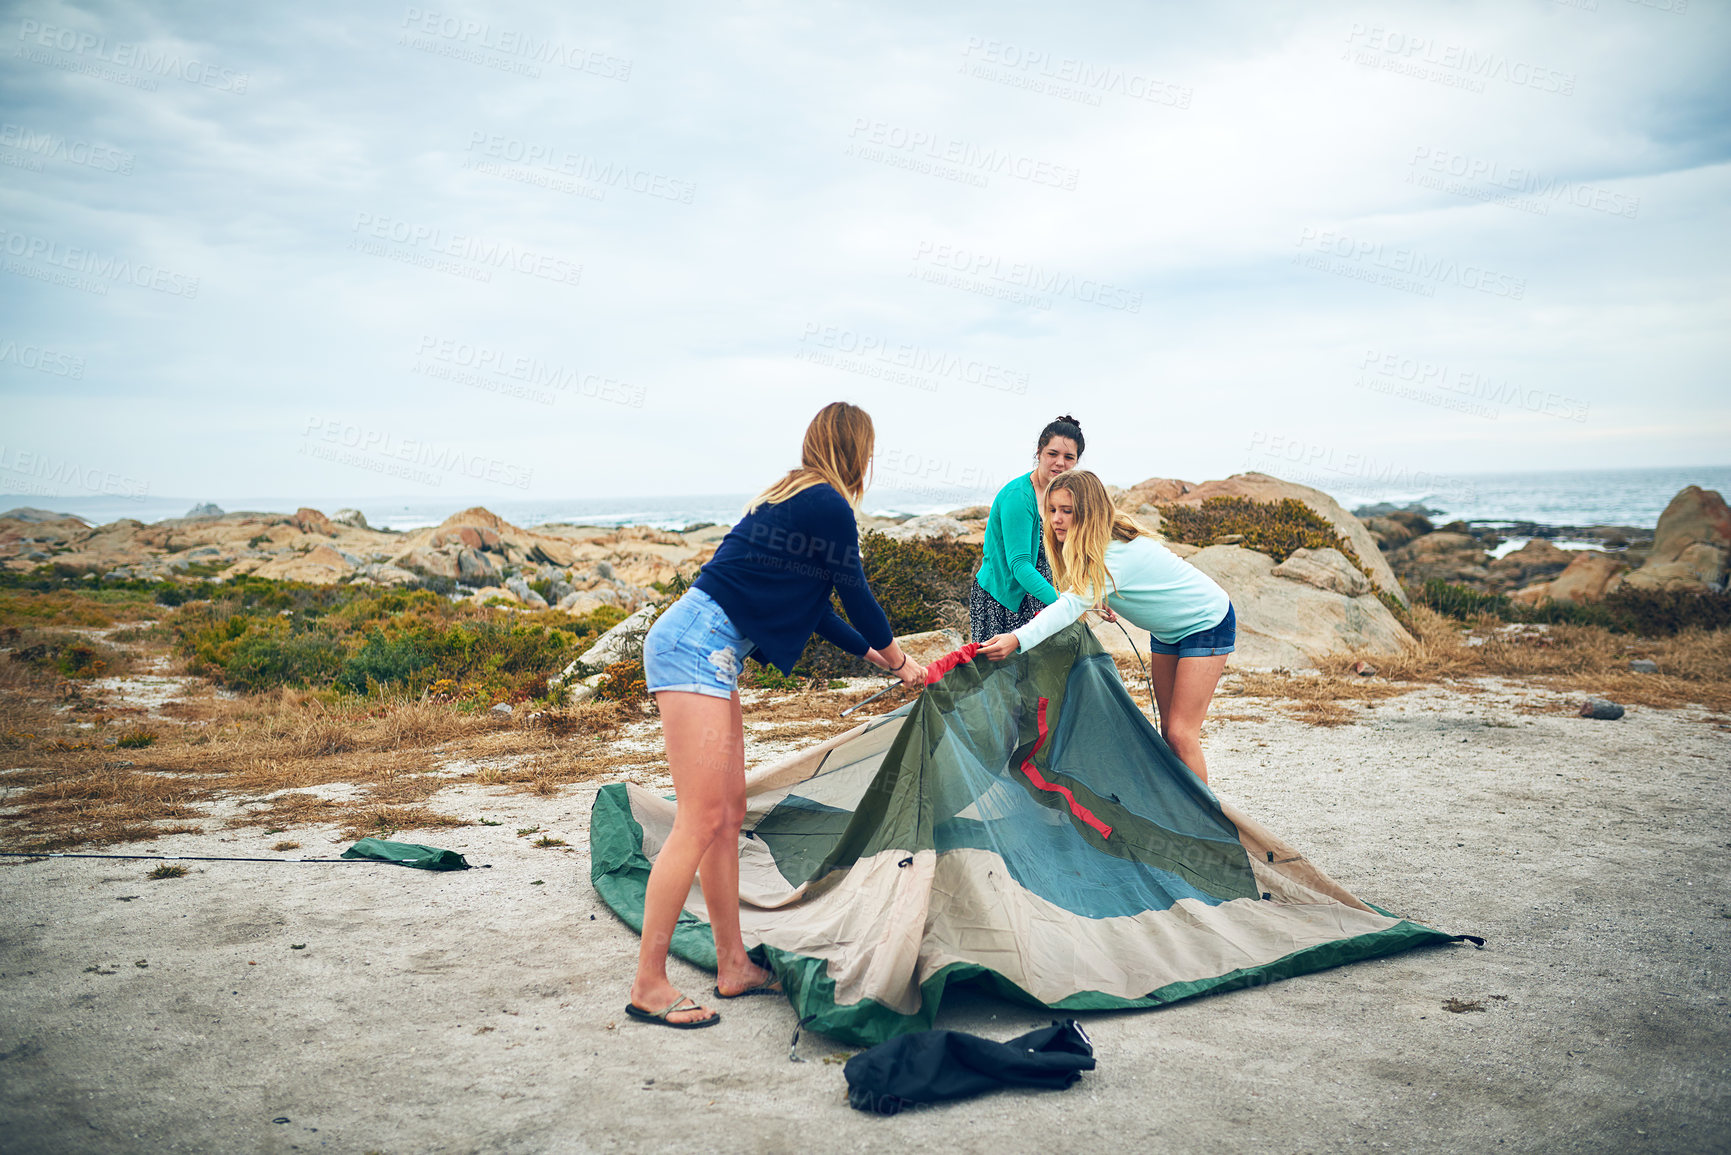 Buy stock photo Shot of a group of female friends setting up a tent outdoors